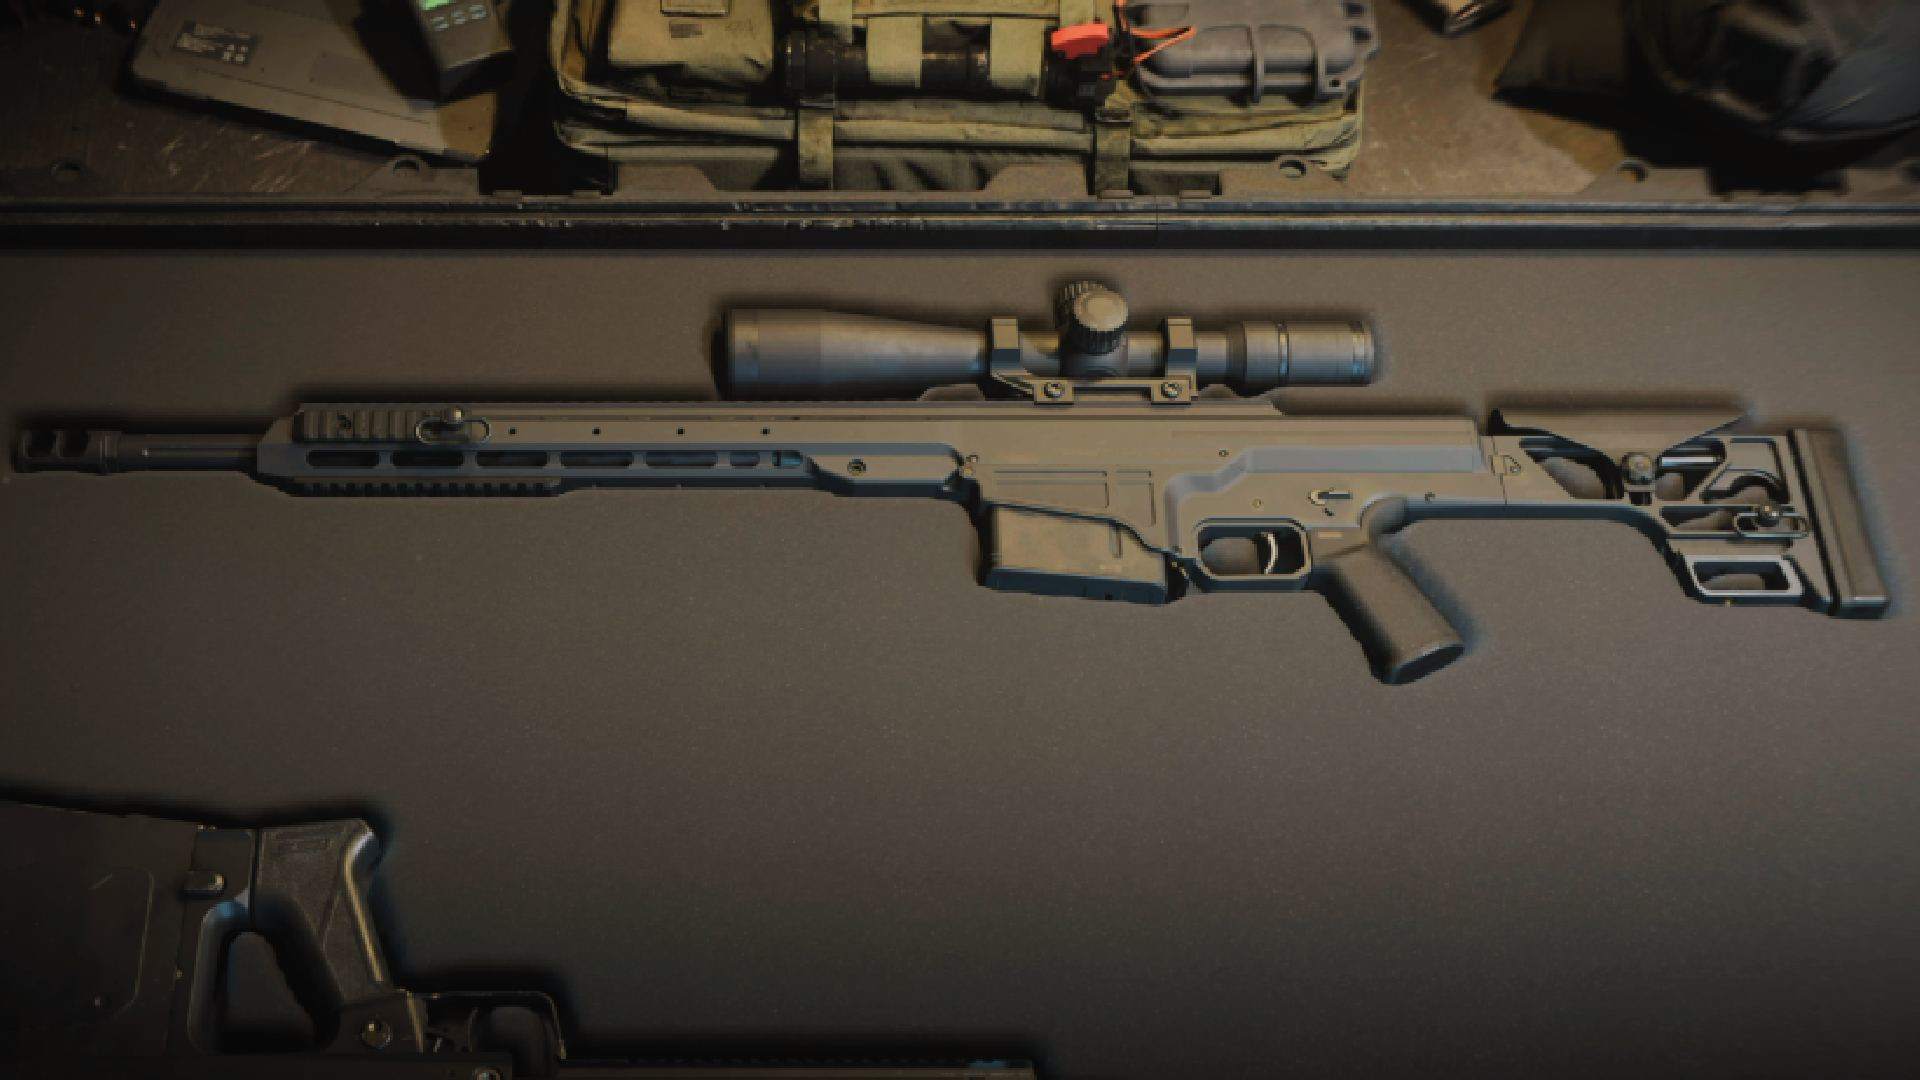 The Best Sniper in Warzone: The 15 Best Sniper Rifles CoD